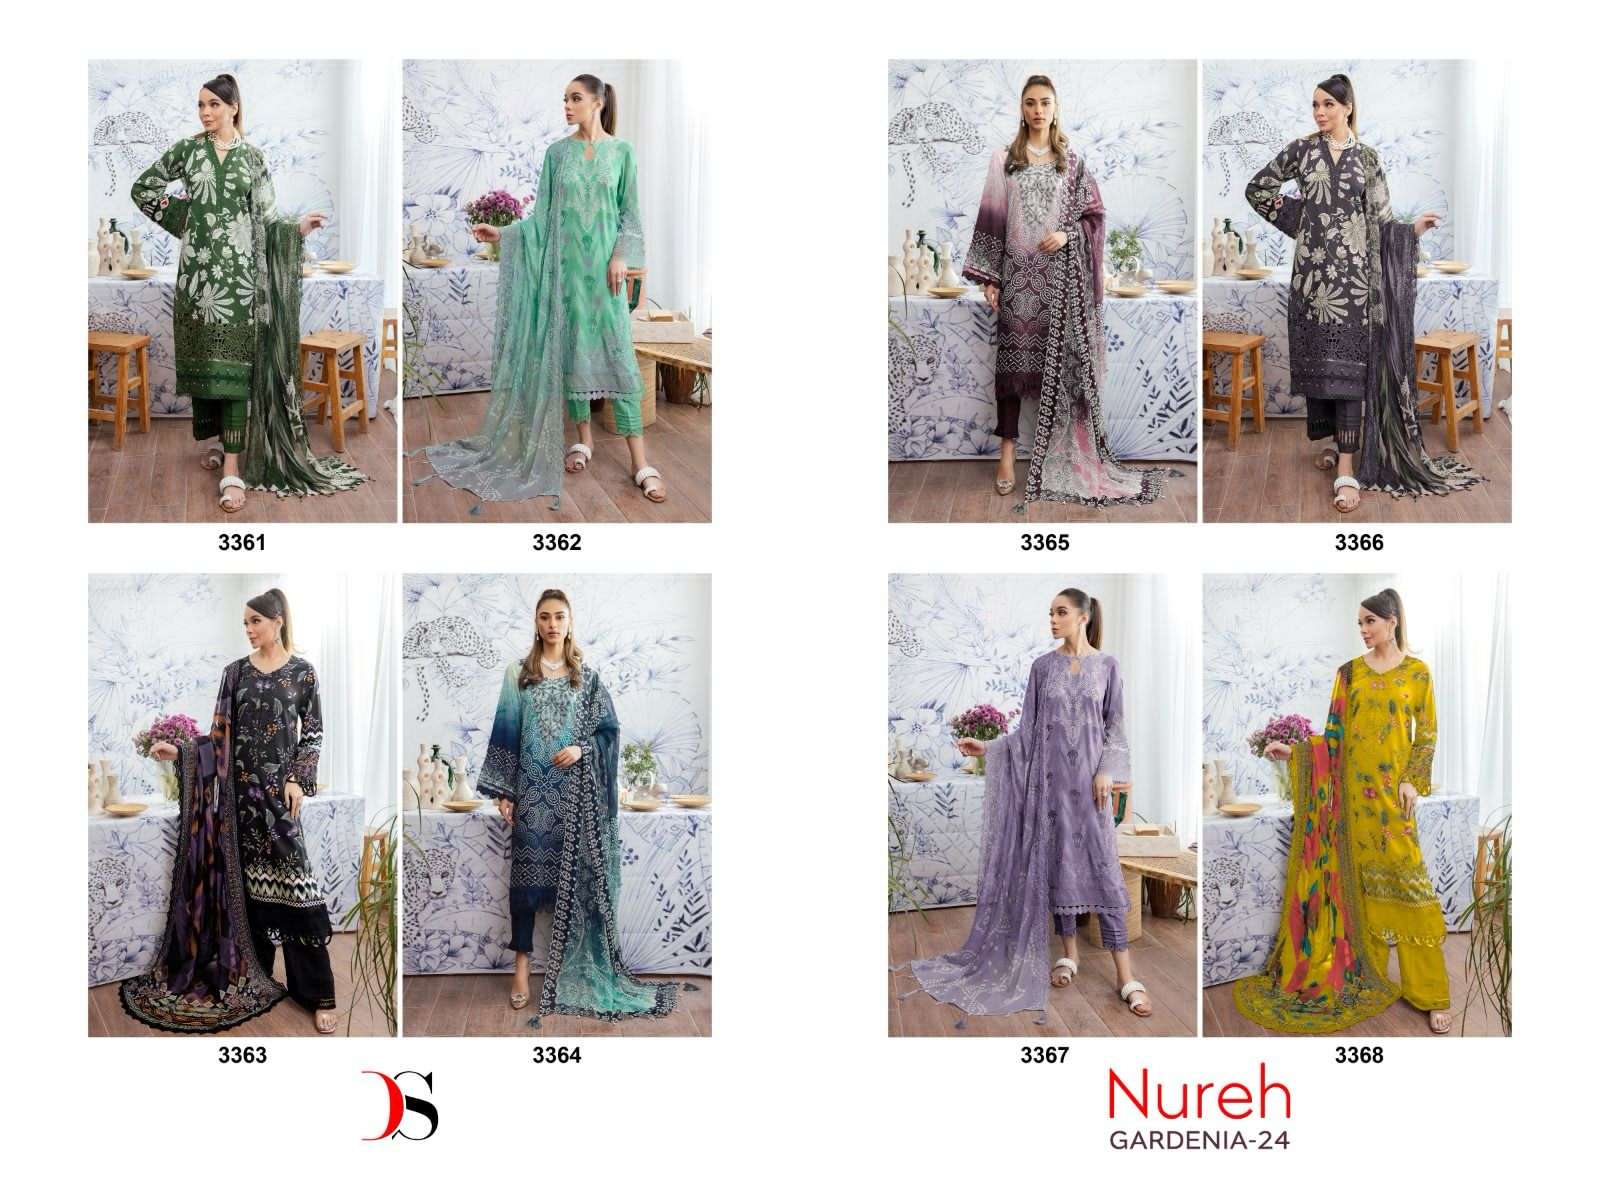 Nureh gardenia-24 by deepsy suits cotton pakistani suits with cotton dupatta collection at wholesale price